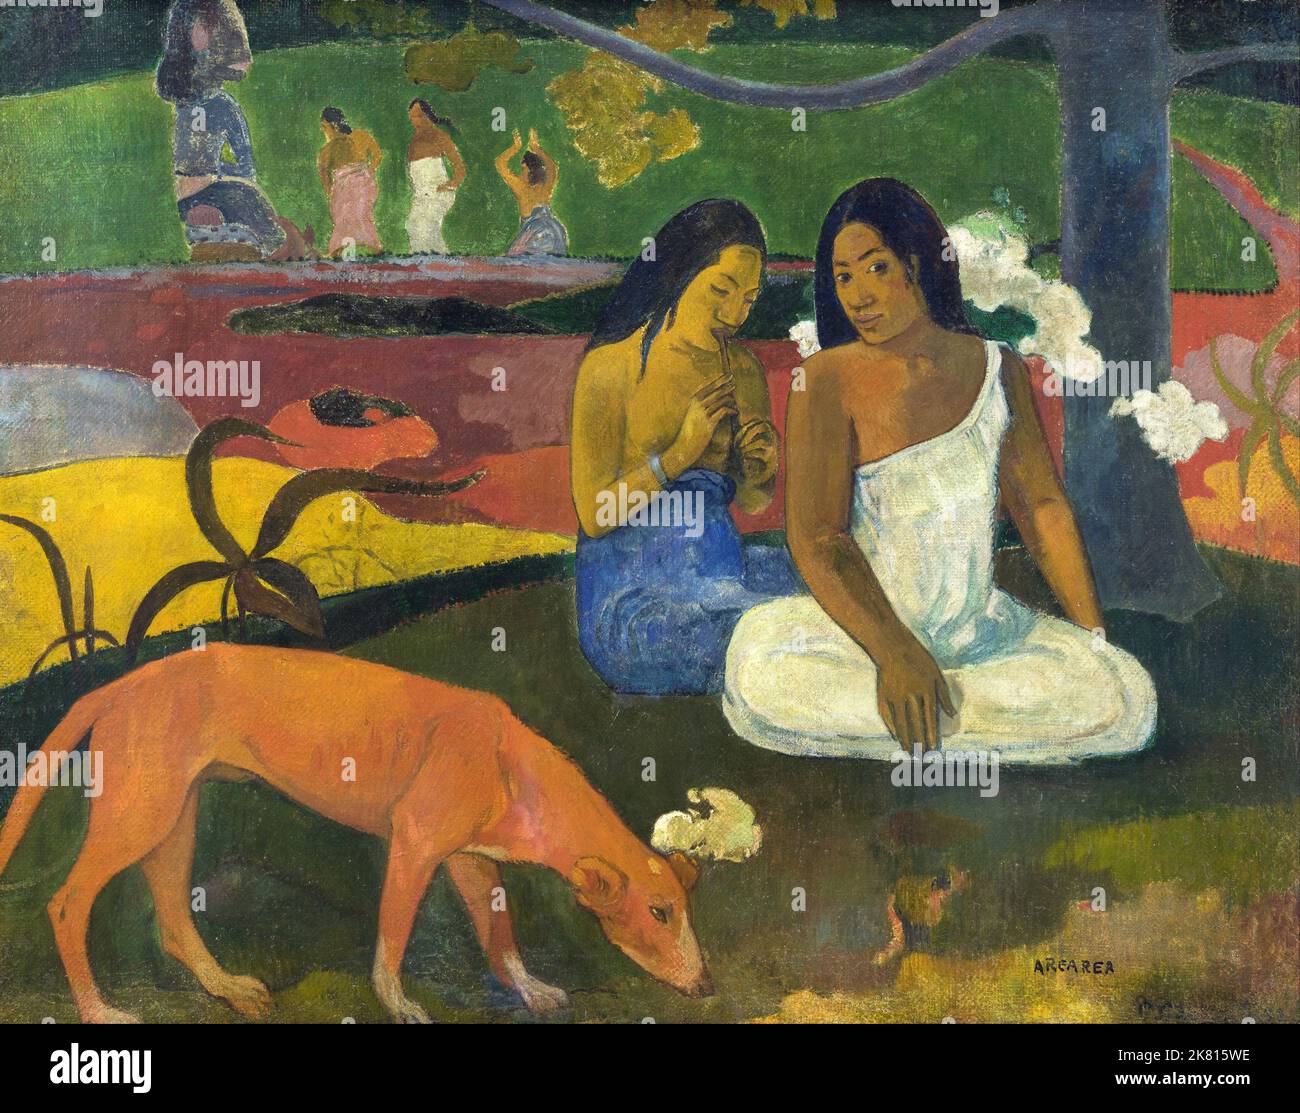 Tahiti: 'Arearea' (Joyfulness). Oil on canvas painting by Paul Gauguin (7 June 1848 - 8 May 1903), 1892.  Paul Gauguin was born in Paris in 1848 and spent some of his childhood in Peru. He worked as a stockbroker with little success, and suffered from bouts of severe depression. He also painted. In 1891, Gauguin, frustrated by lack of recognition at home and financially destitute, sailed to the tropics to escape European civilization and 'everything that is artificial and conventional'. His time there, particularly in Tahiti and the Marquesas Islands, was the subject of much interest. Stock Photo